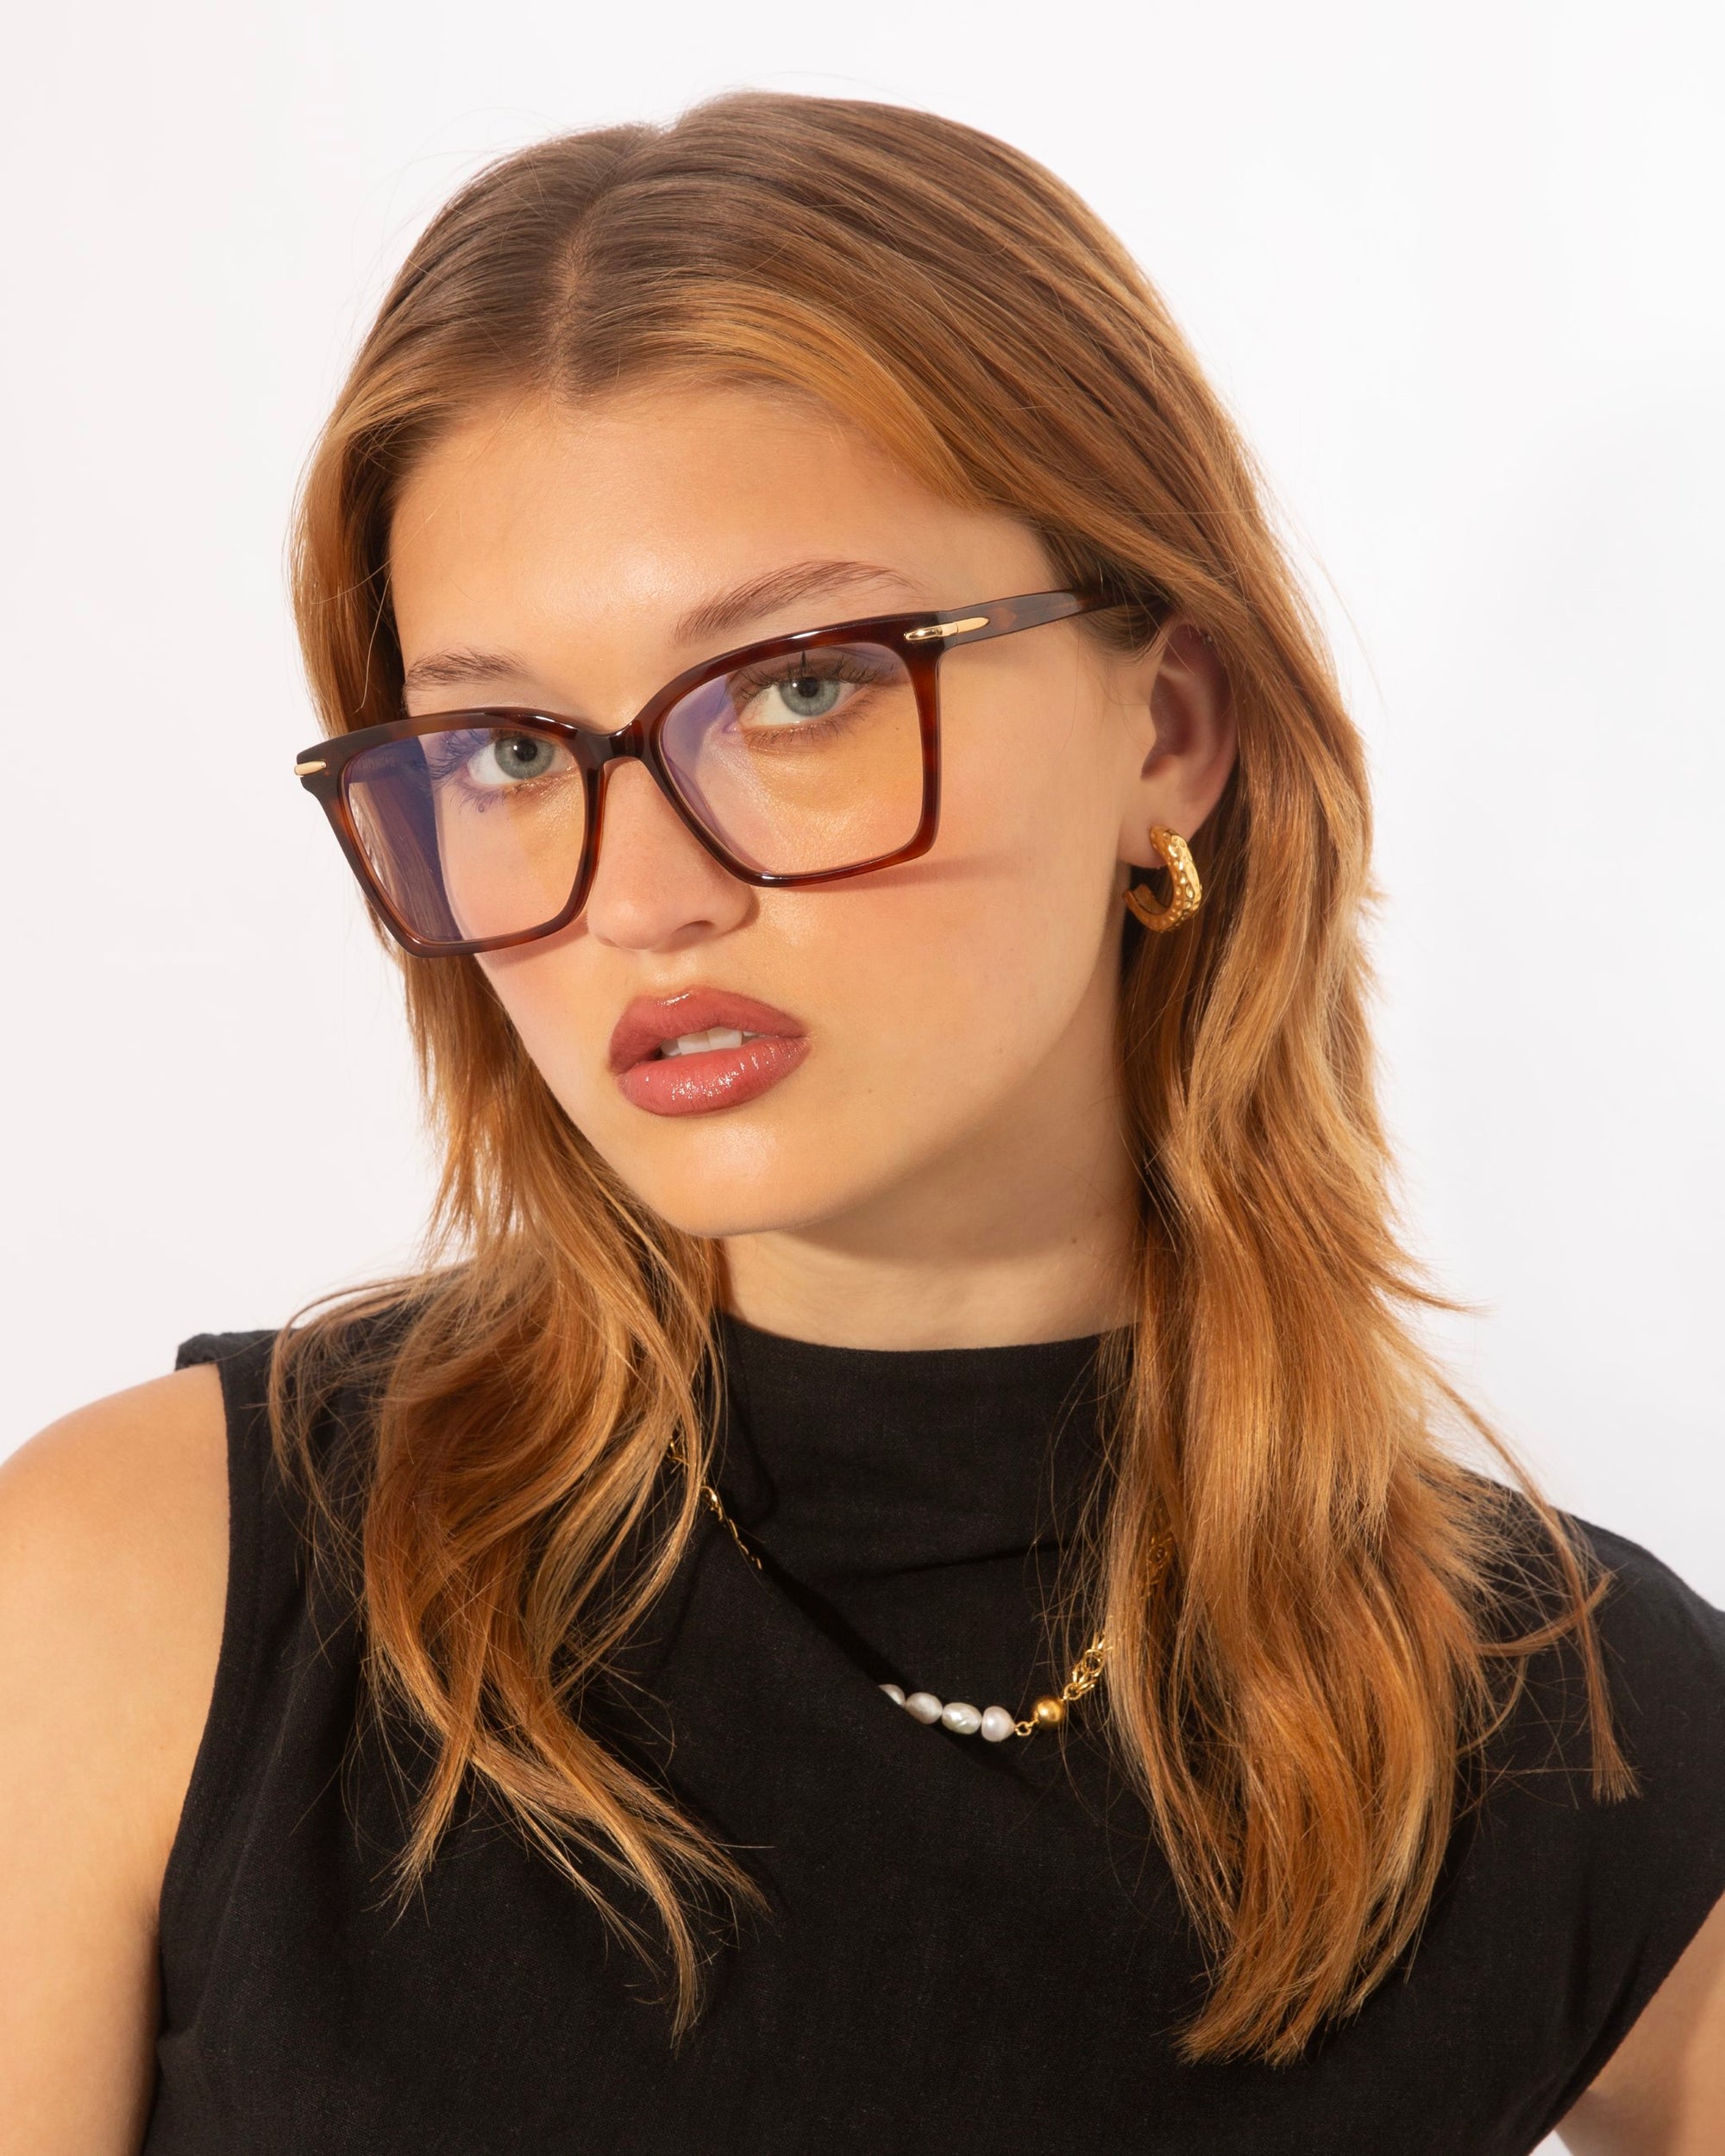 A woman with long, light brown hair is wearing rectangular Azure optical glasses by For Art&#39;s Sake® with a brown frame. She has a serious expression, with her head slightly tilted. Dressed in a sleeveless black top and accessorized with small hoop earrings and a delicate necklace, she stands against a white background.